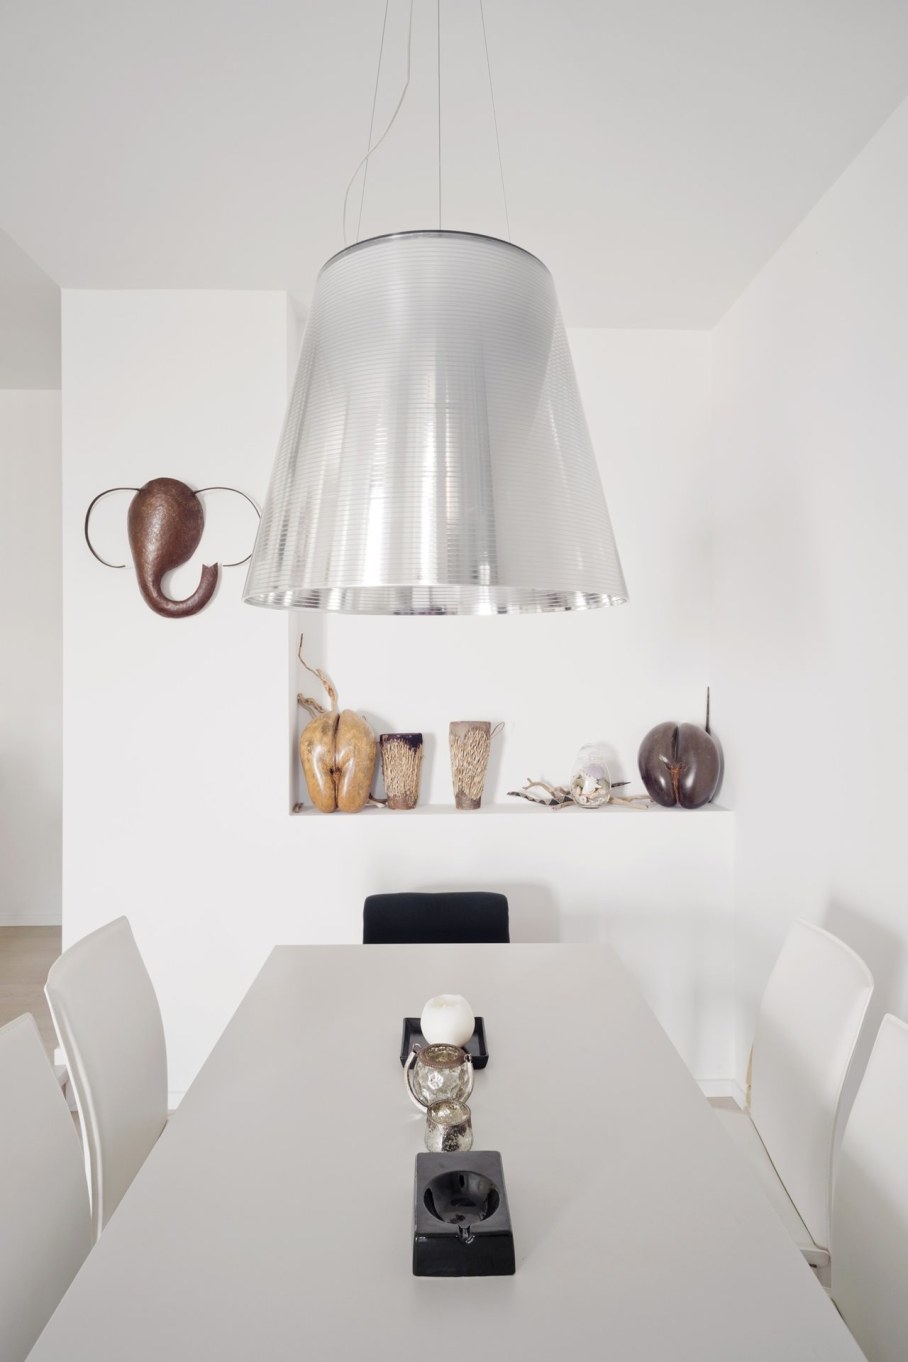 Shining apartment in Genoa - Dining table